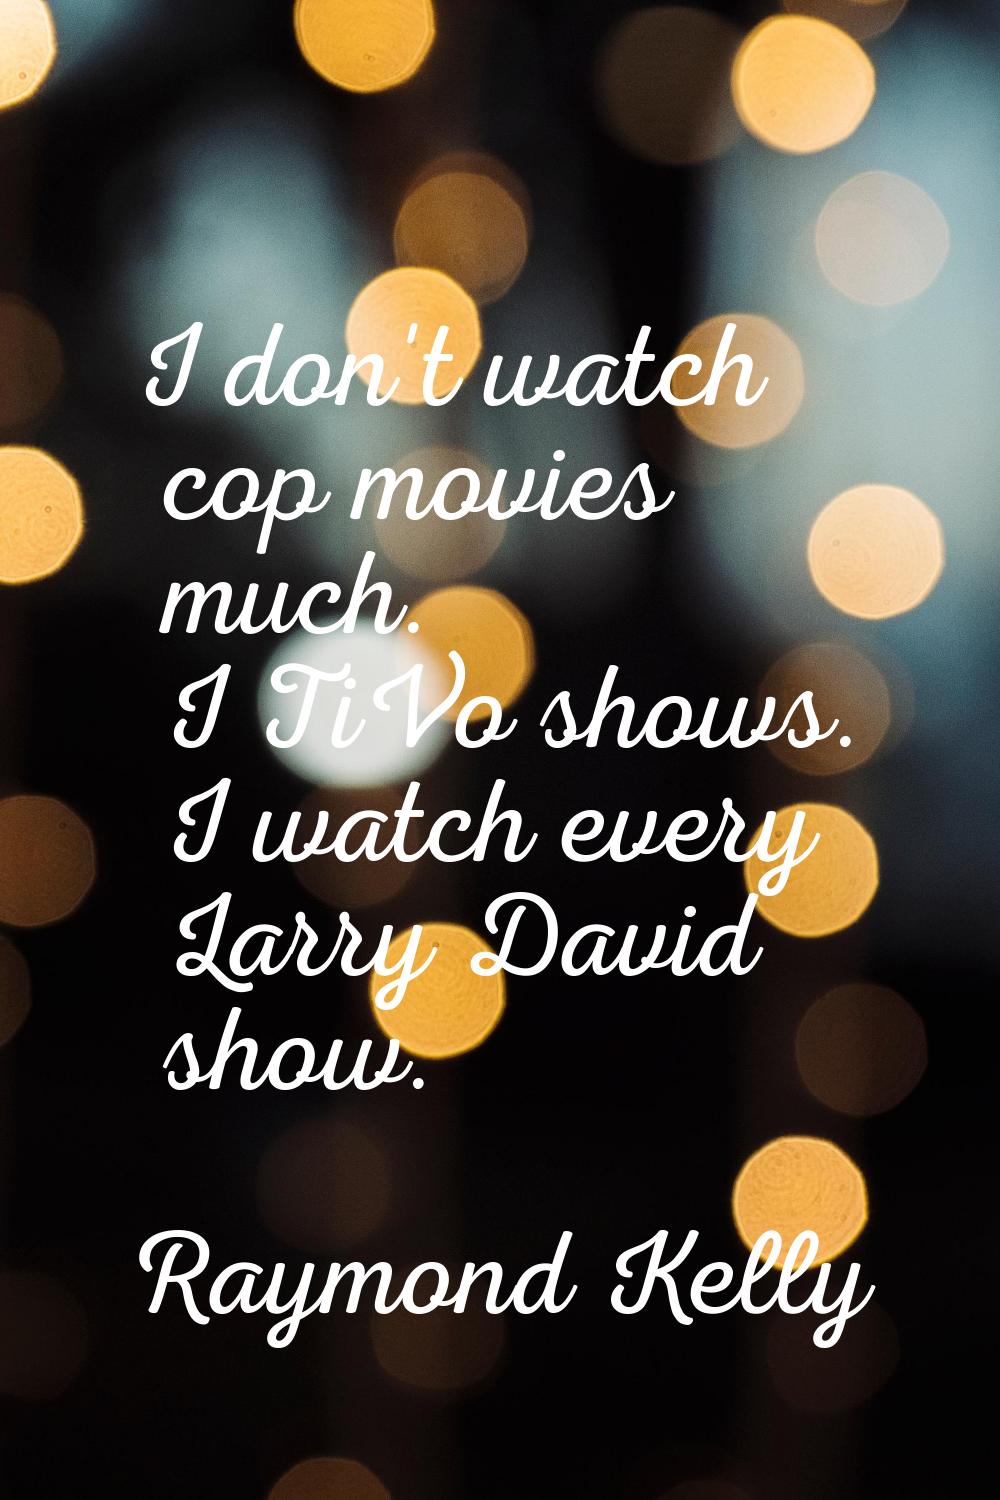 I don't watch cop movies much. I TiVo shows. I watch every Larry David show.